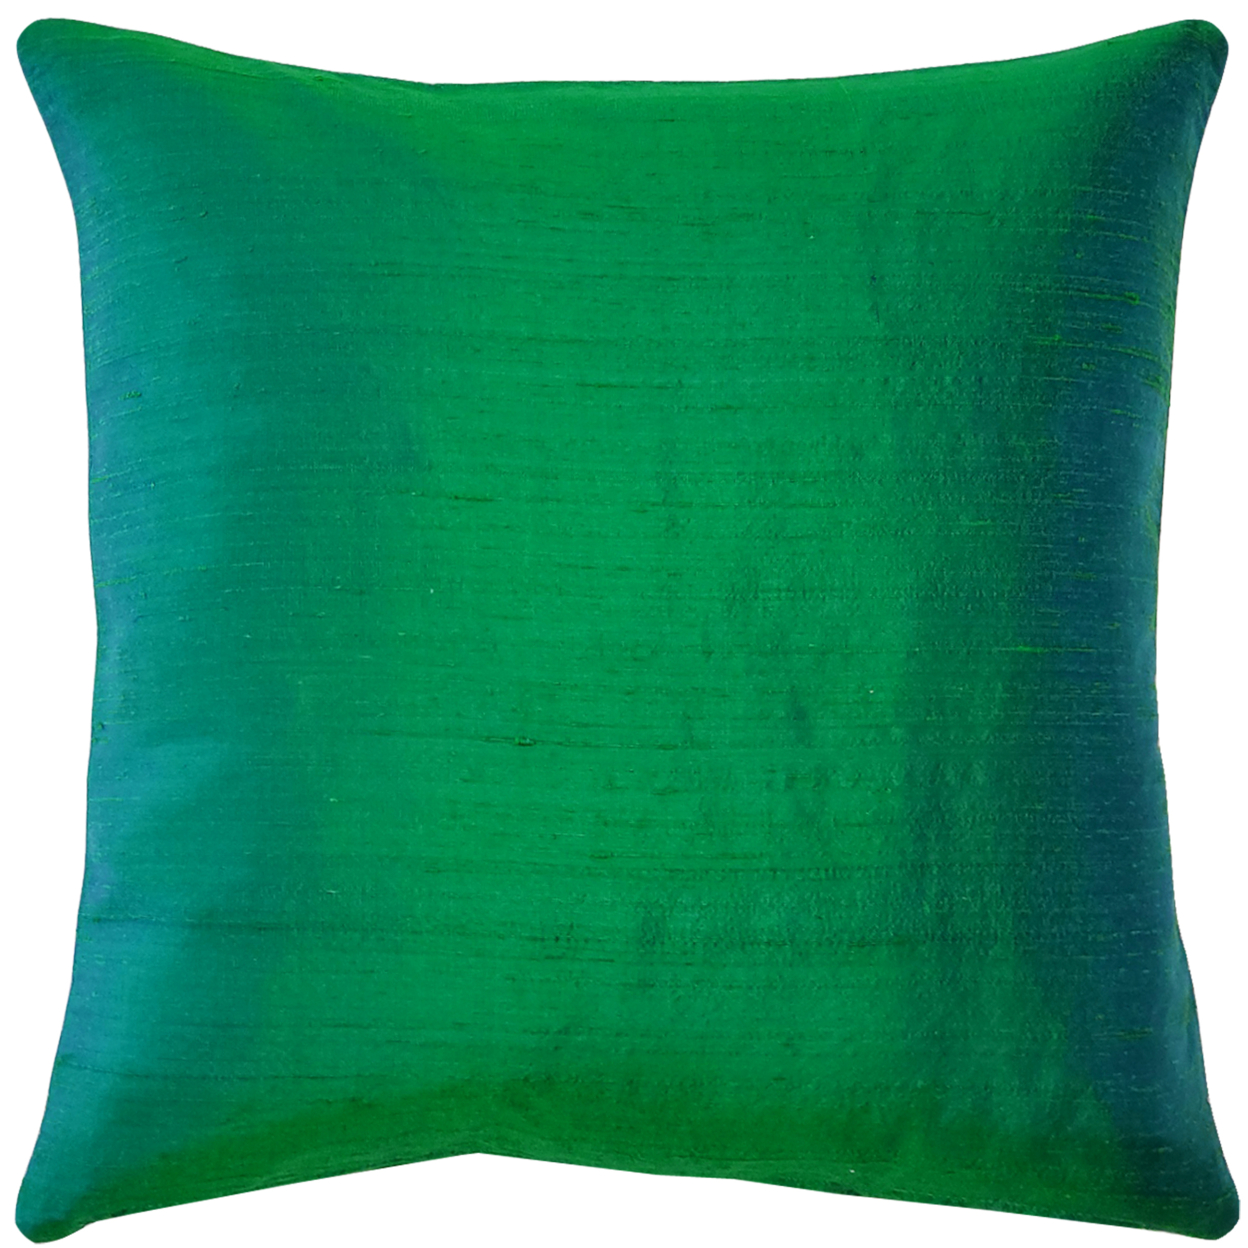 Sankara Emerald Green Silk Throw Pillow 20x20 Inches Square, Complete Pillow With Polyfill Pillow Insert